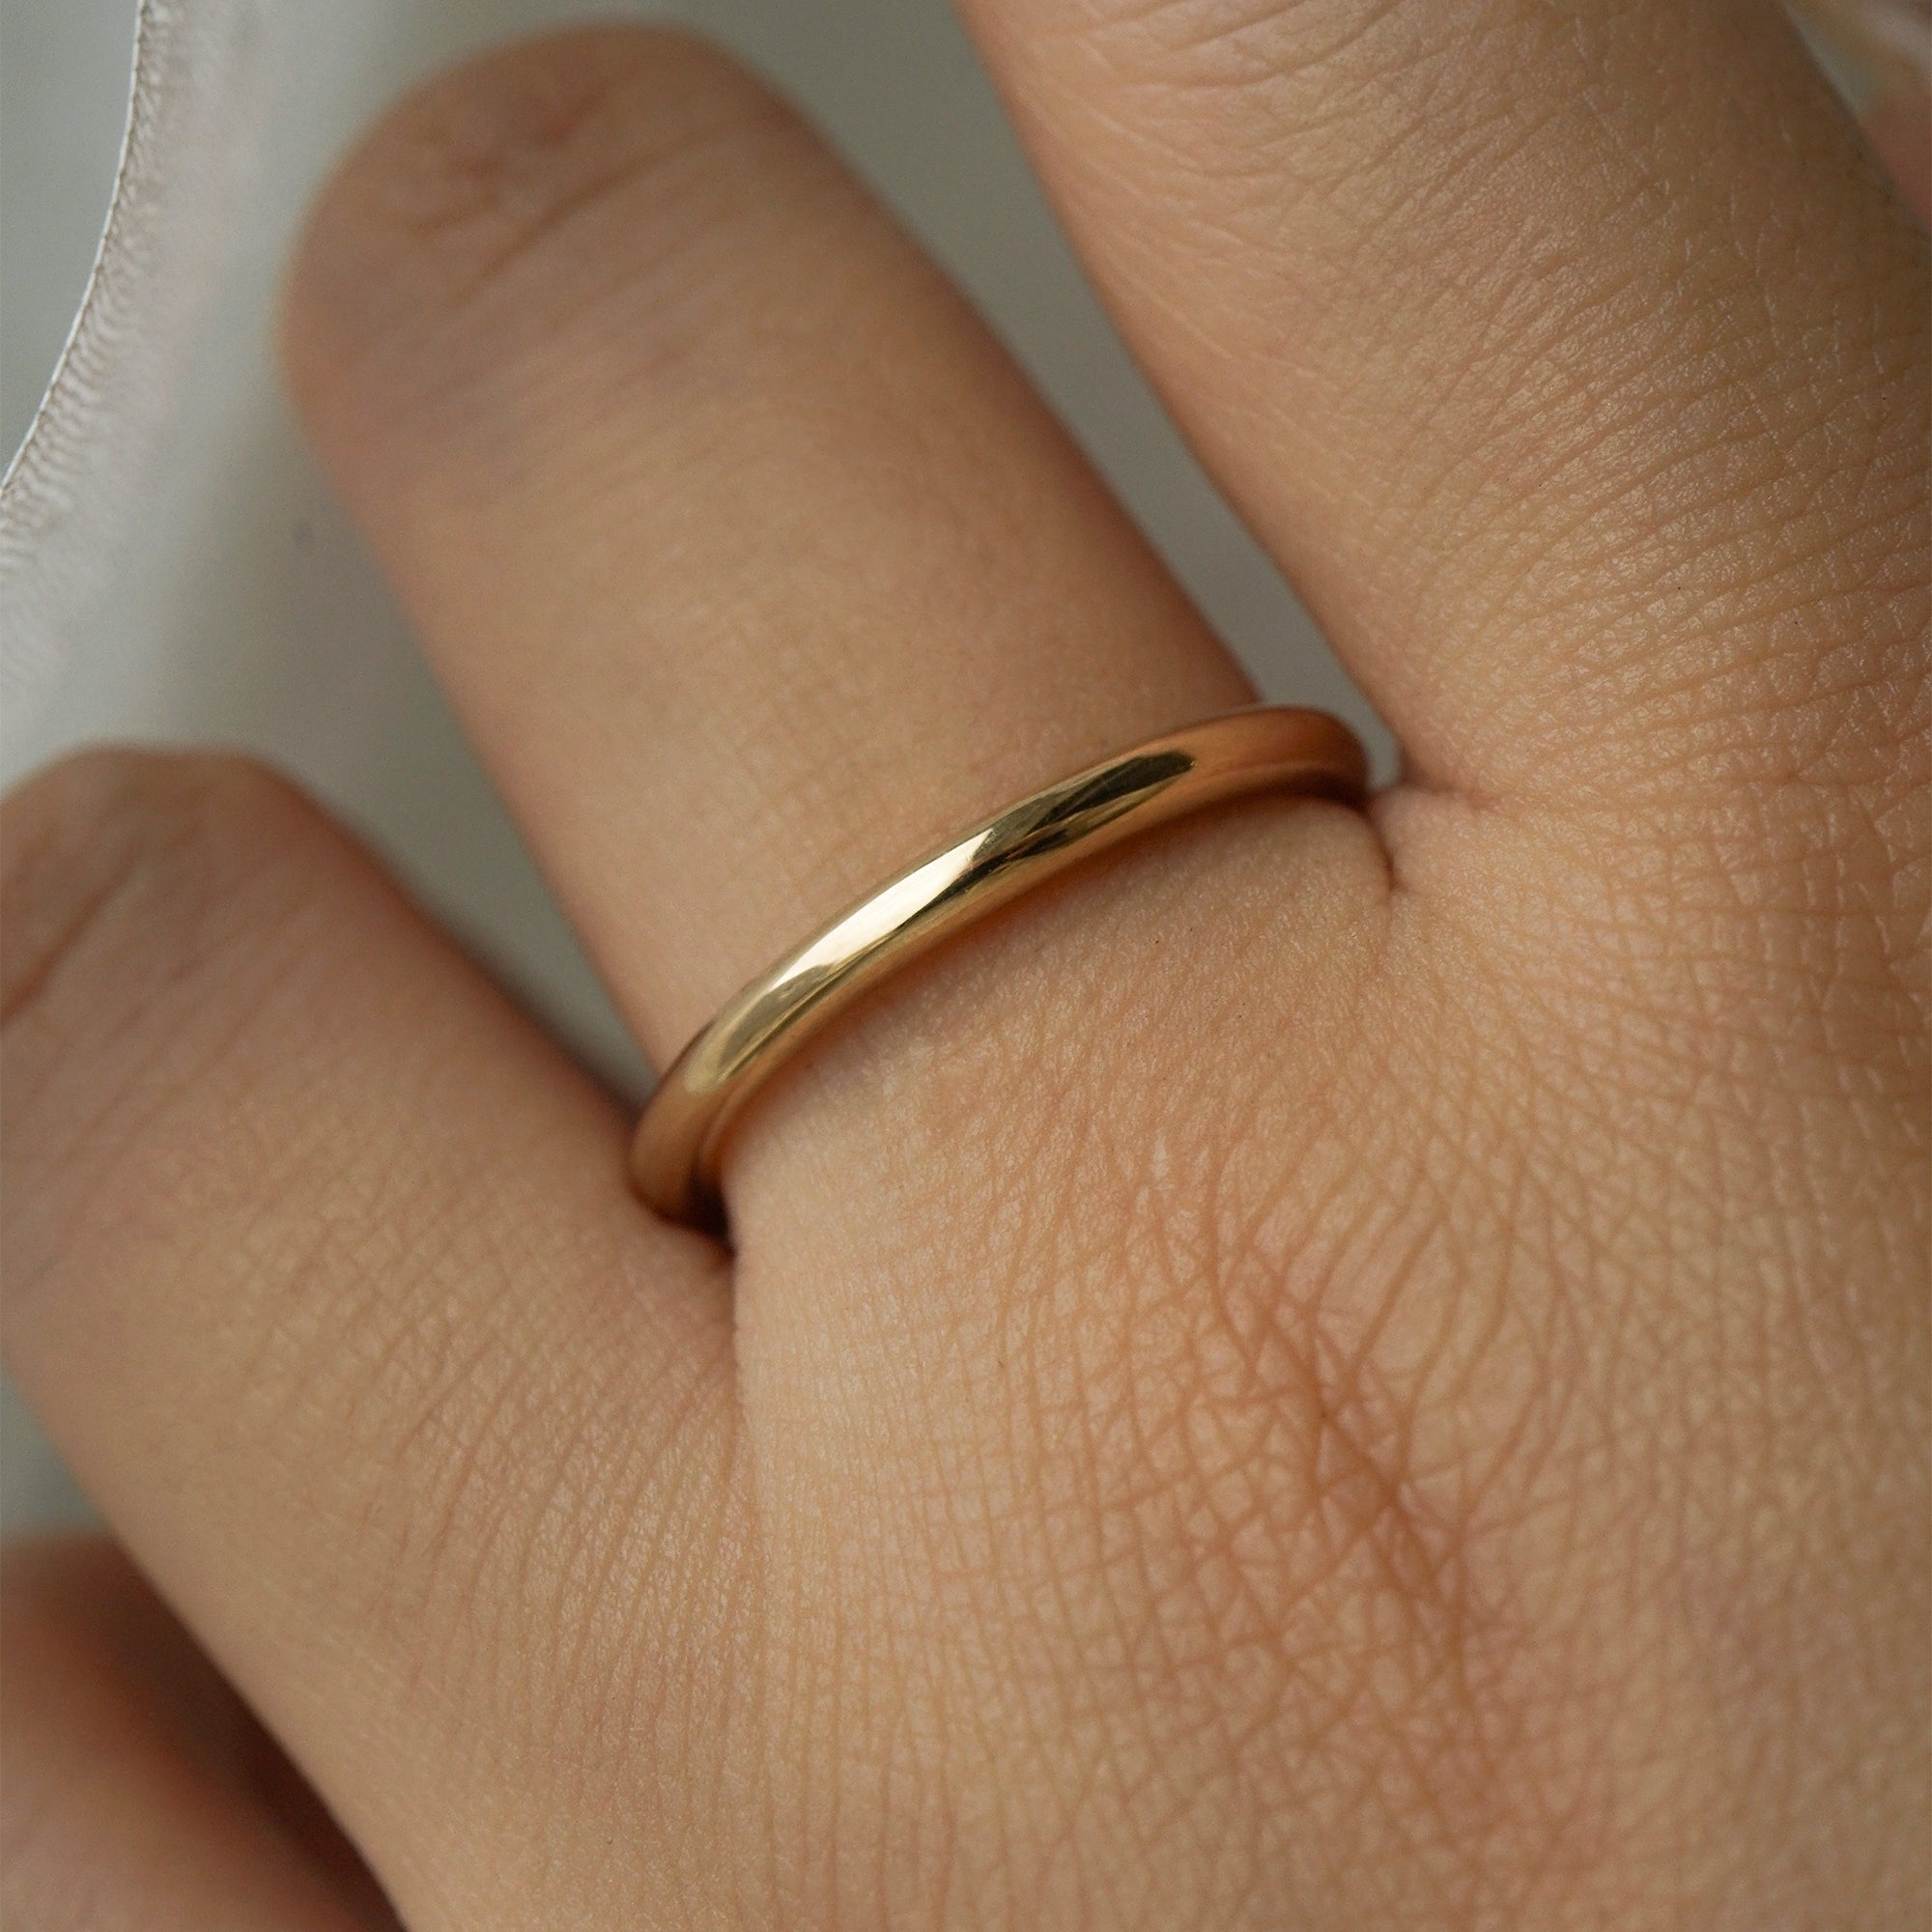 A stock photo of Laurie Fleming Jewellery's plain solid gold "Peach" band, a 2.1mm wide round wire stacking ring/wedding band, handmade in Toronto. The ring is worn on a hand with a light grey background.